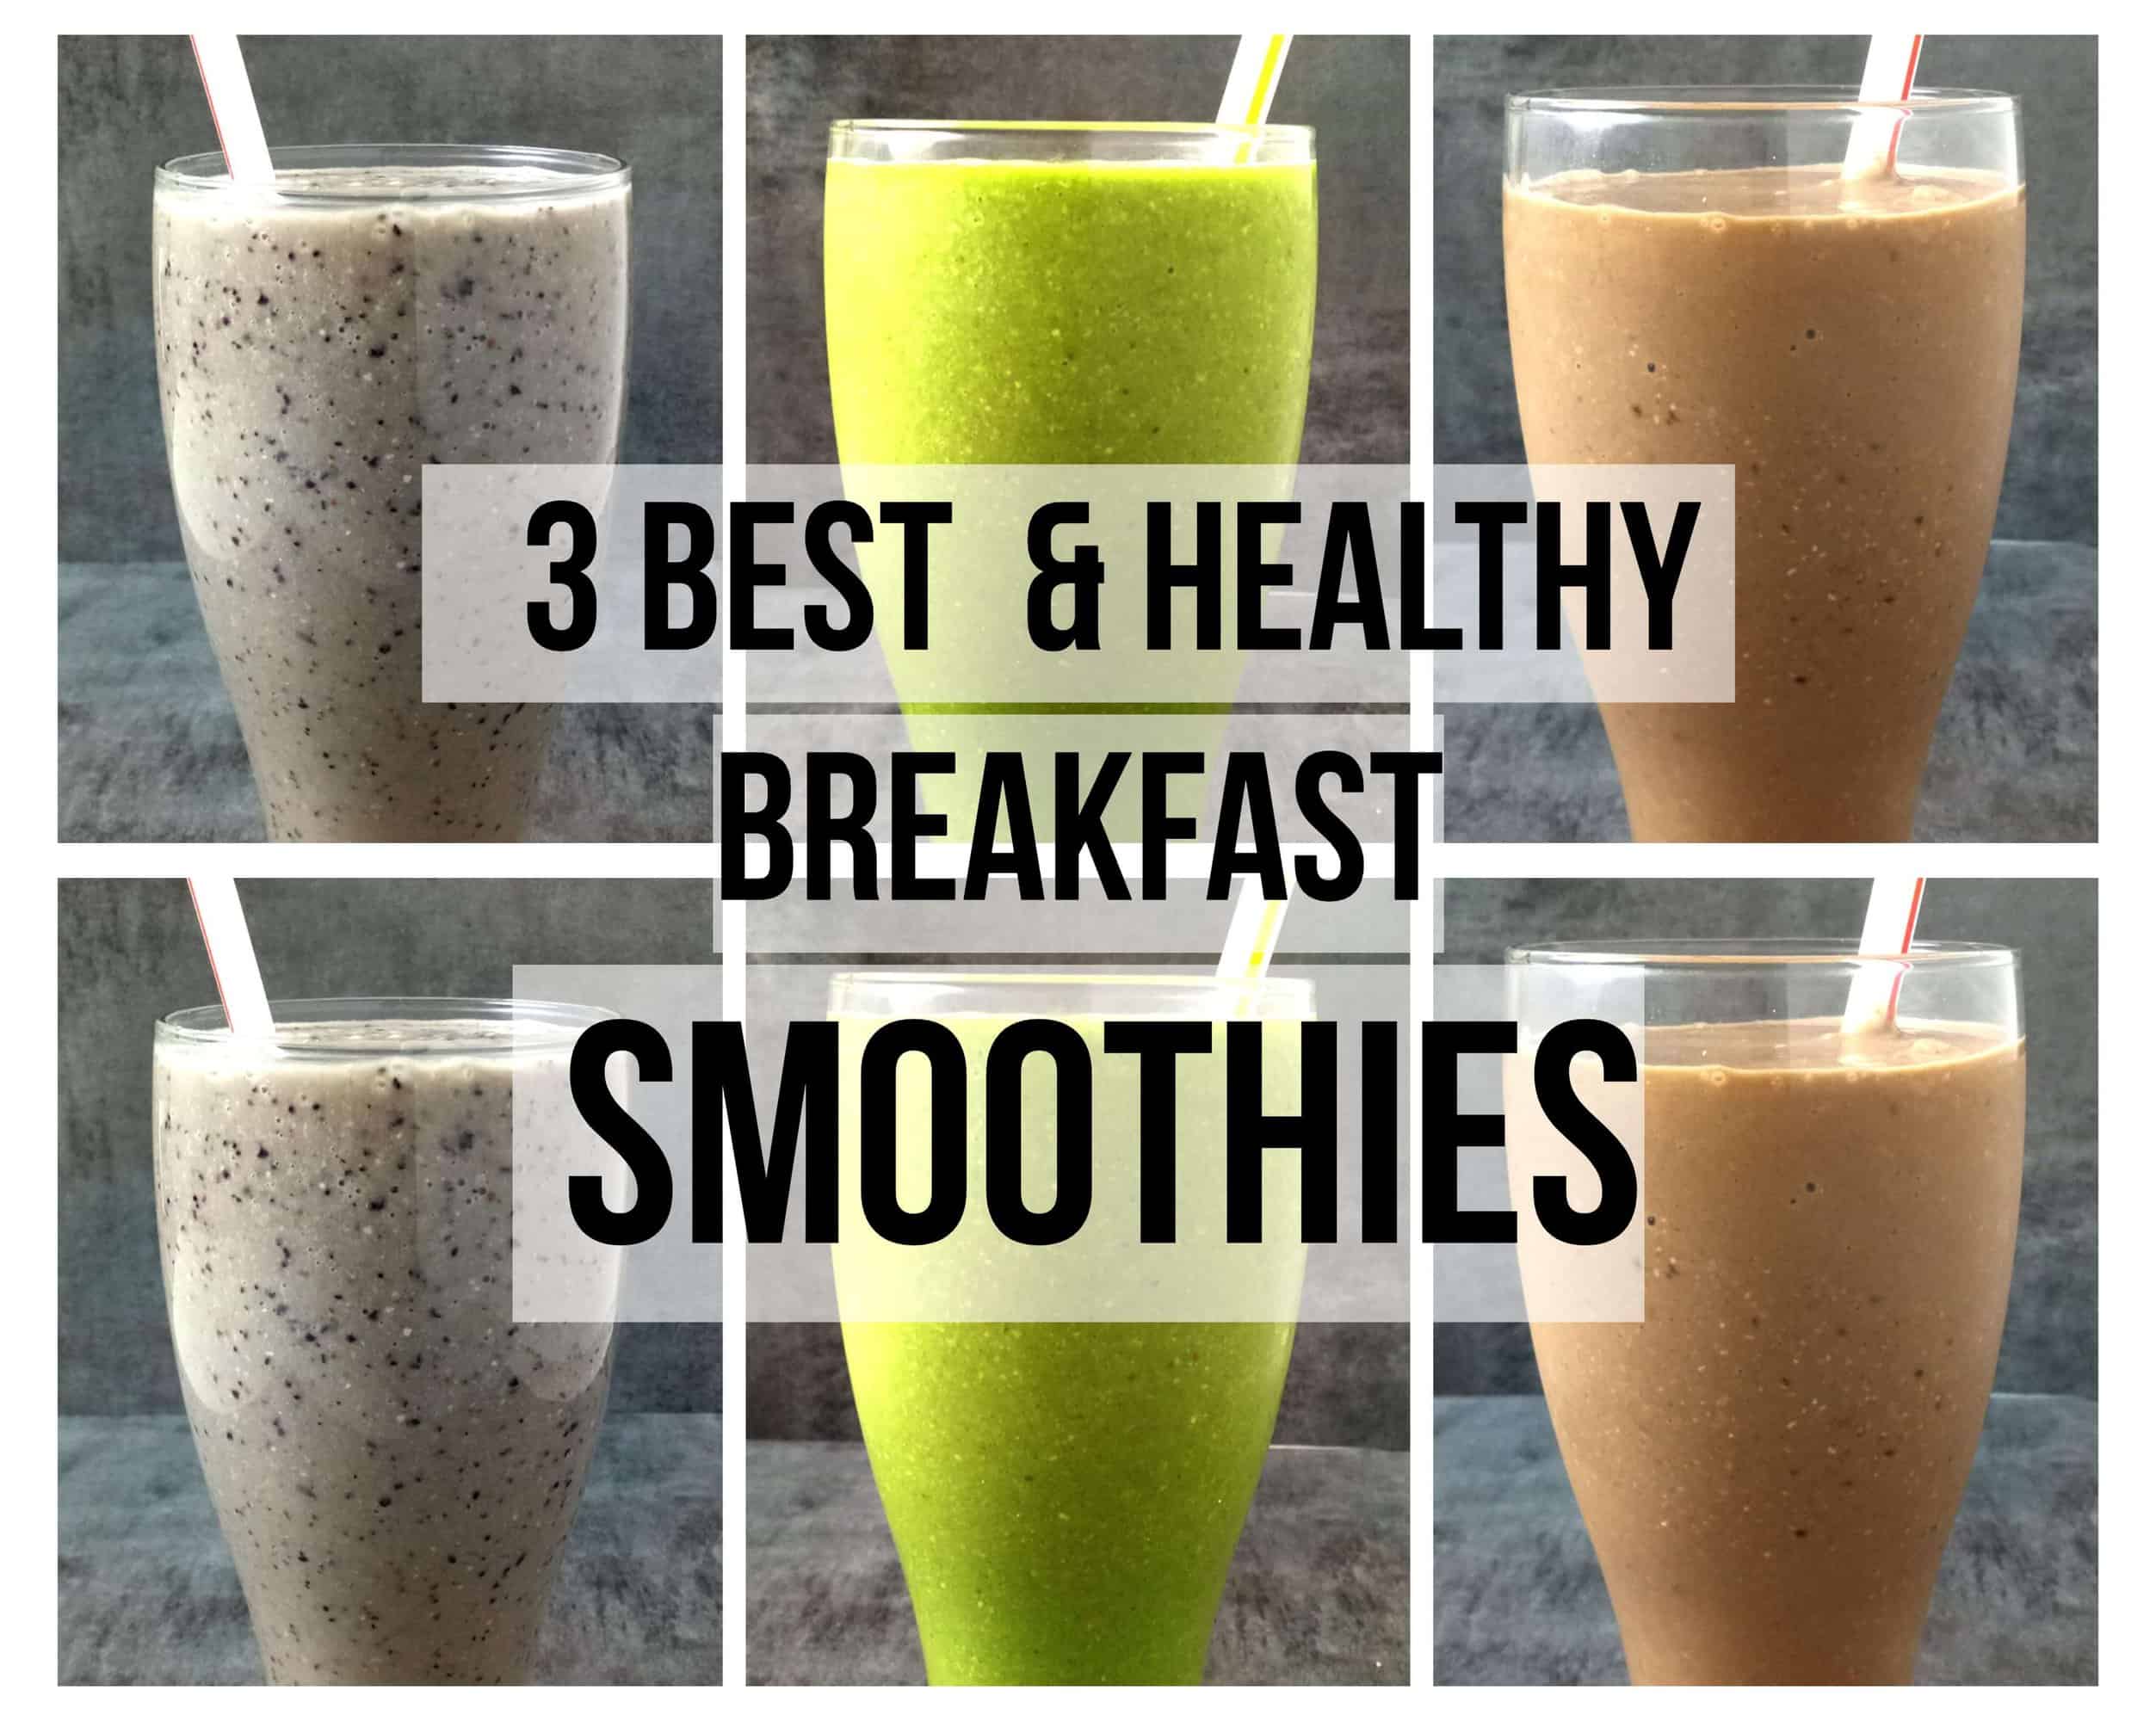 Healthy breakfast smoothies for weight loss, lose belly fat fast, vegan smoothies, #avocado #banana